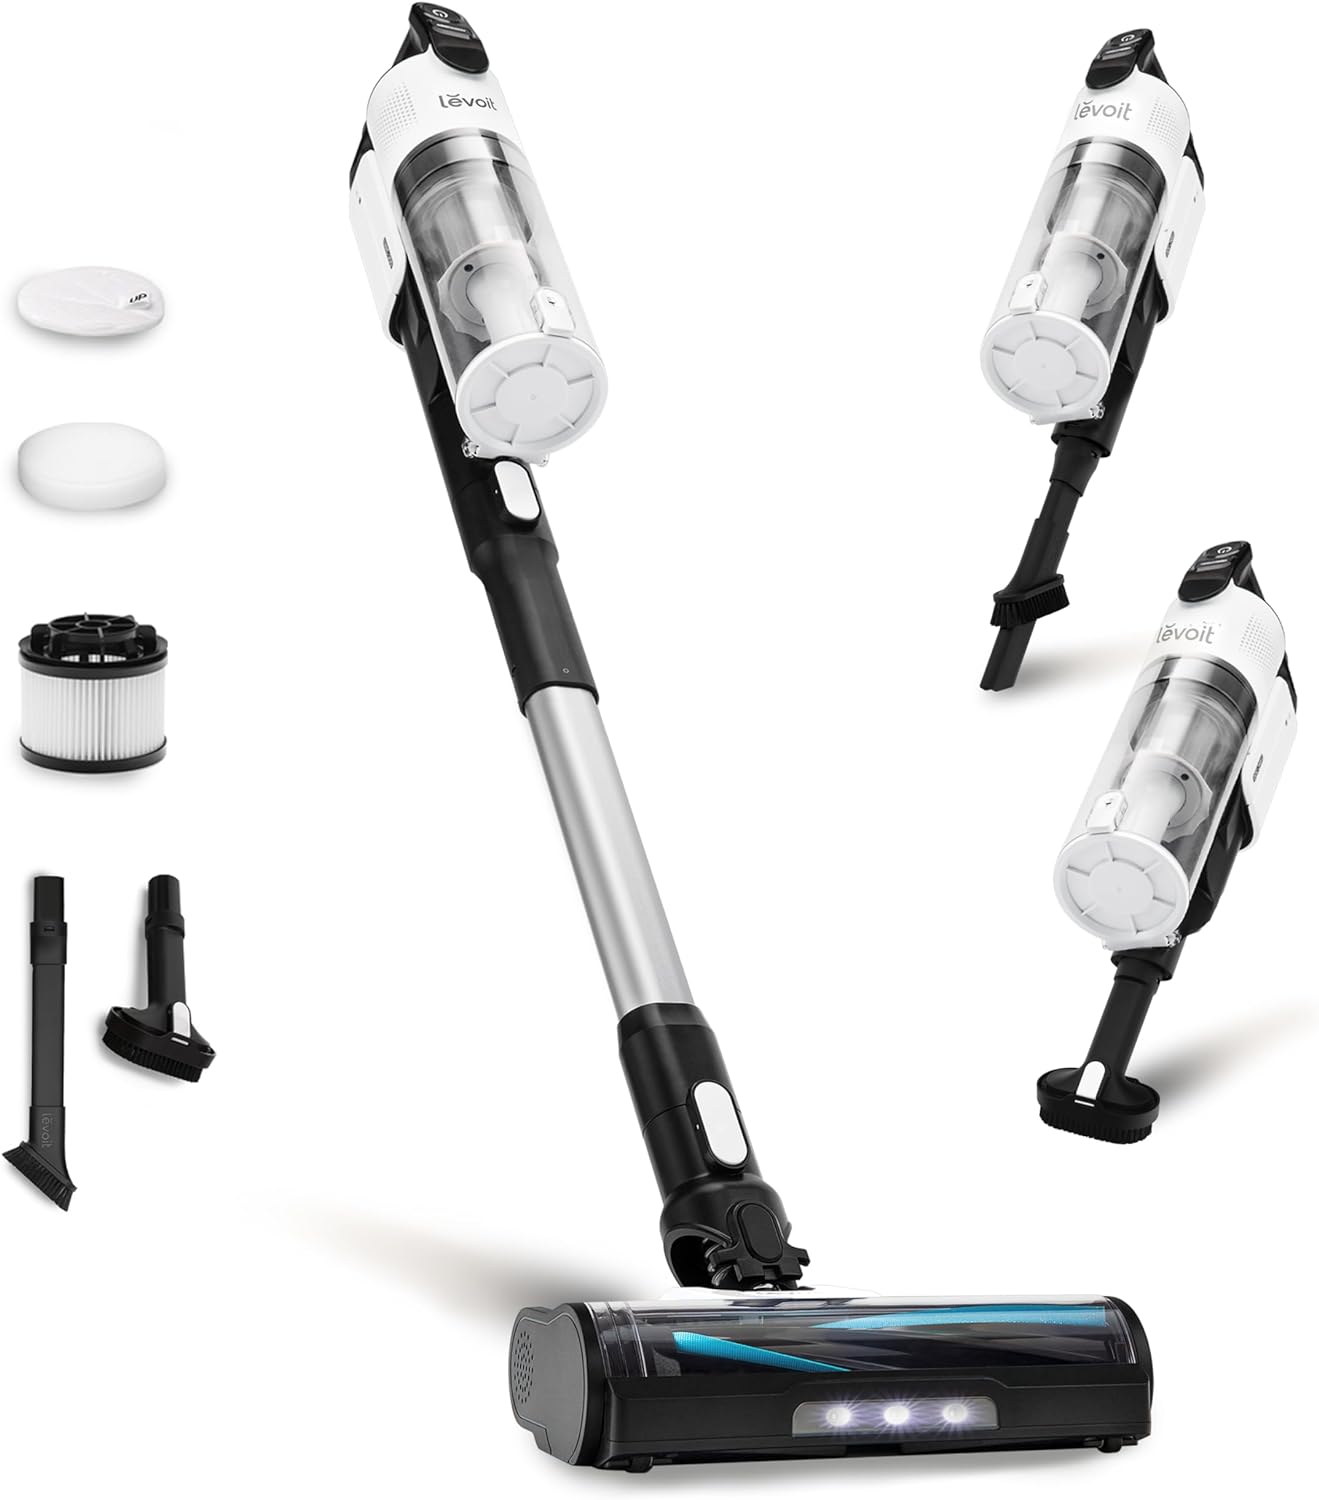 Limited-Time Specials! LEVOIT Cordless Vacuum Cleaner - Up to 50 Minutes, Powerful Suction - Only $139.97!